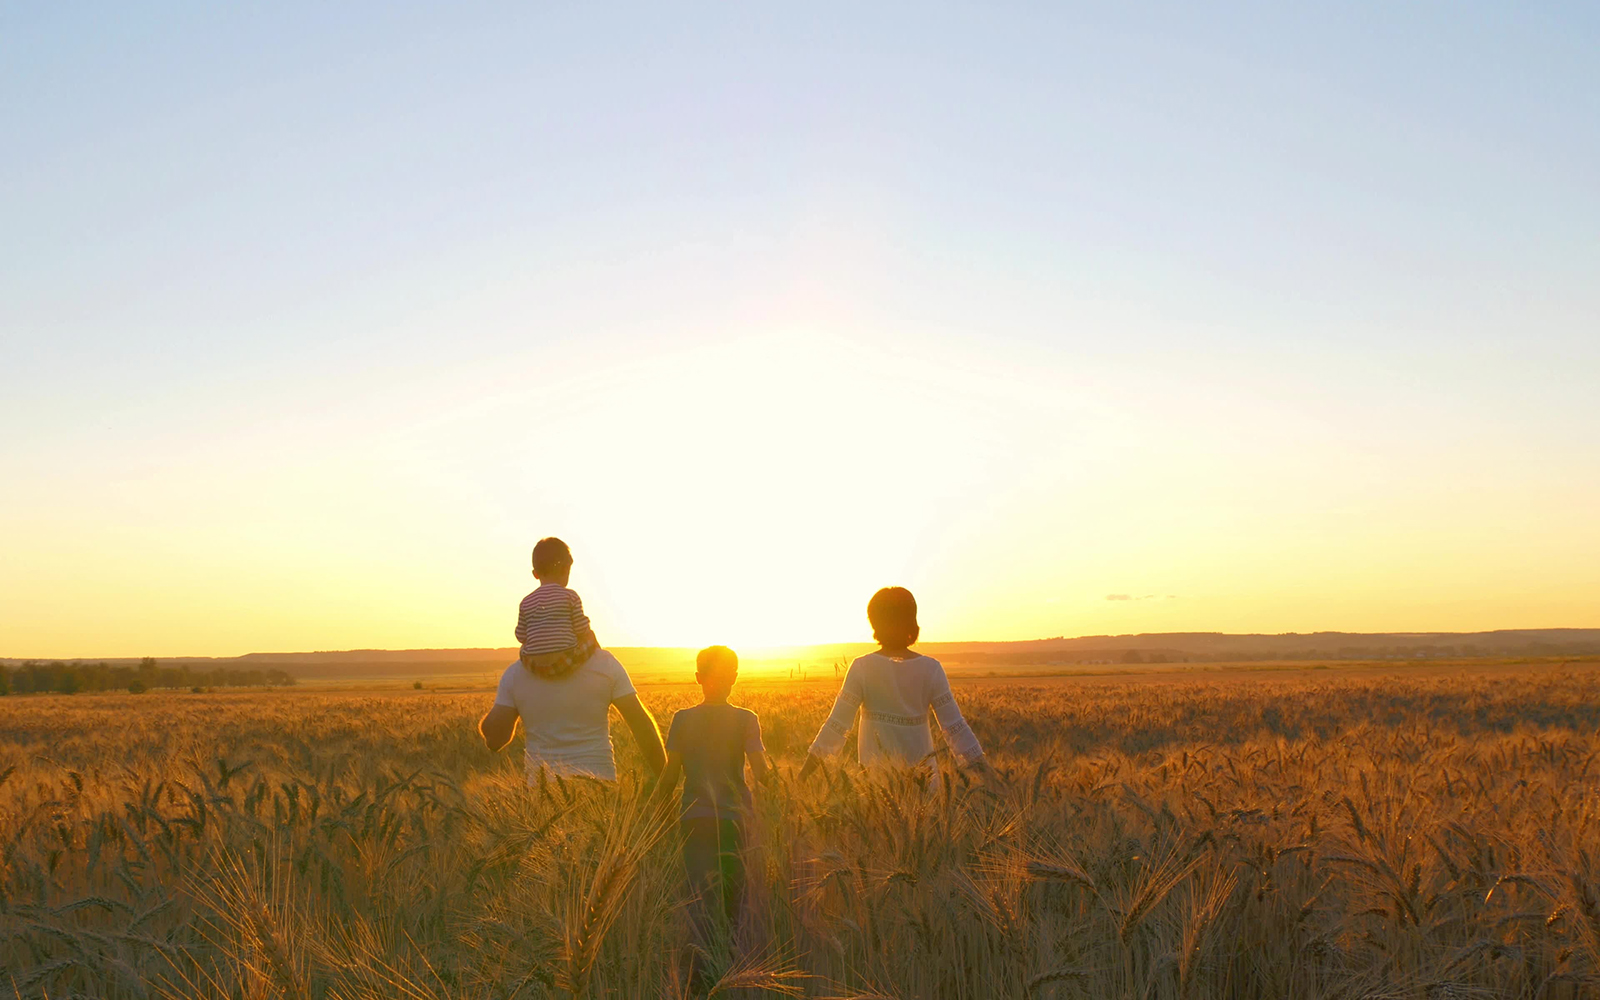 A family walking through a field at sunset